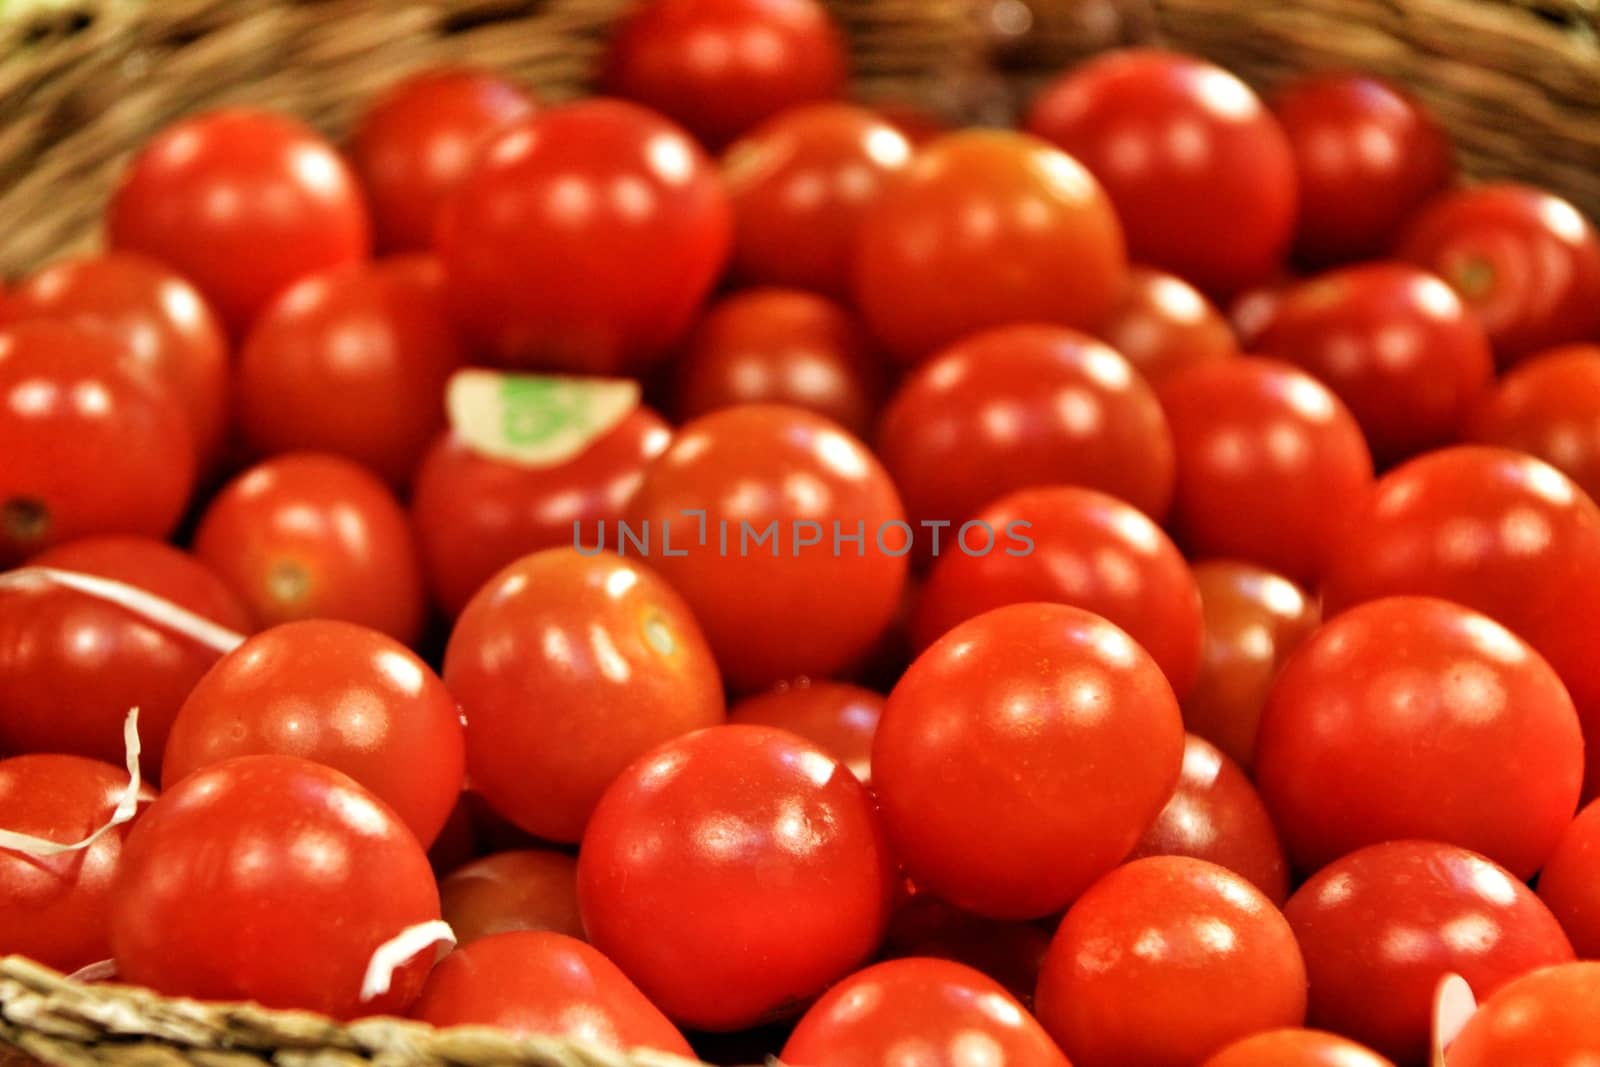 Tomatoes for sale at a market stall by soniabonet